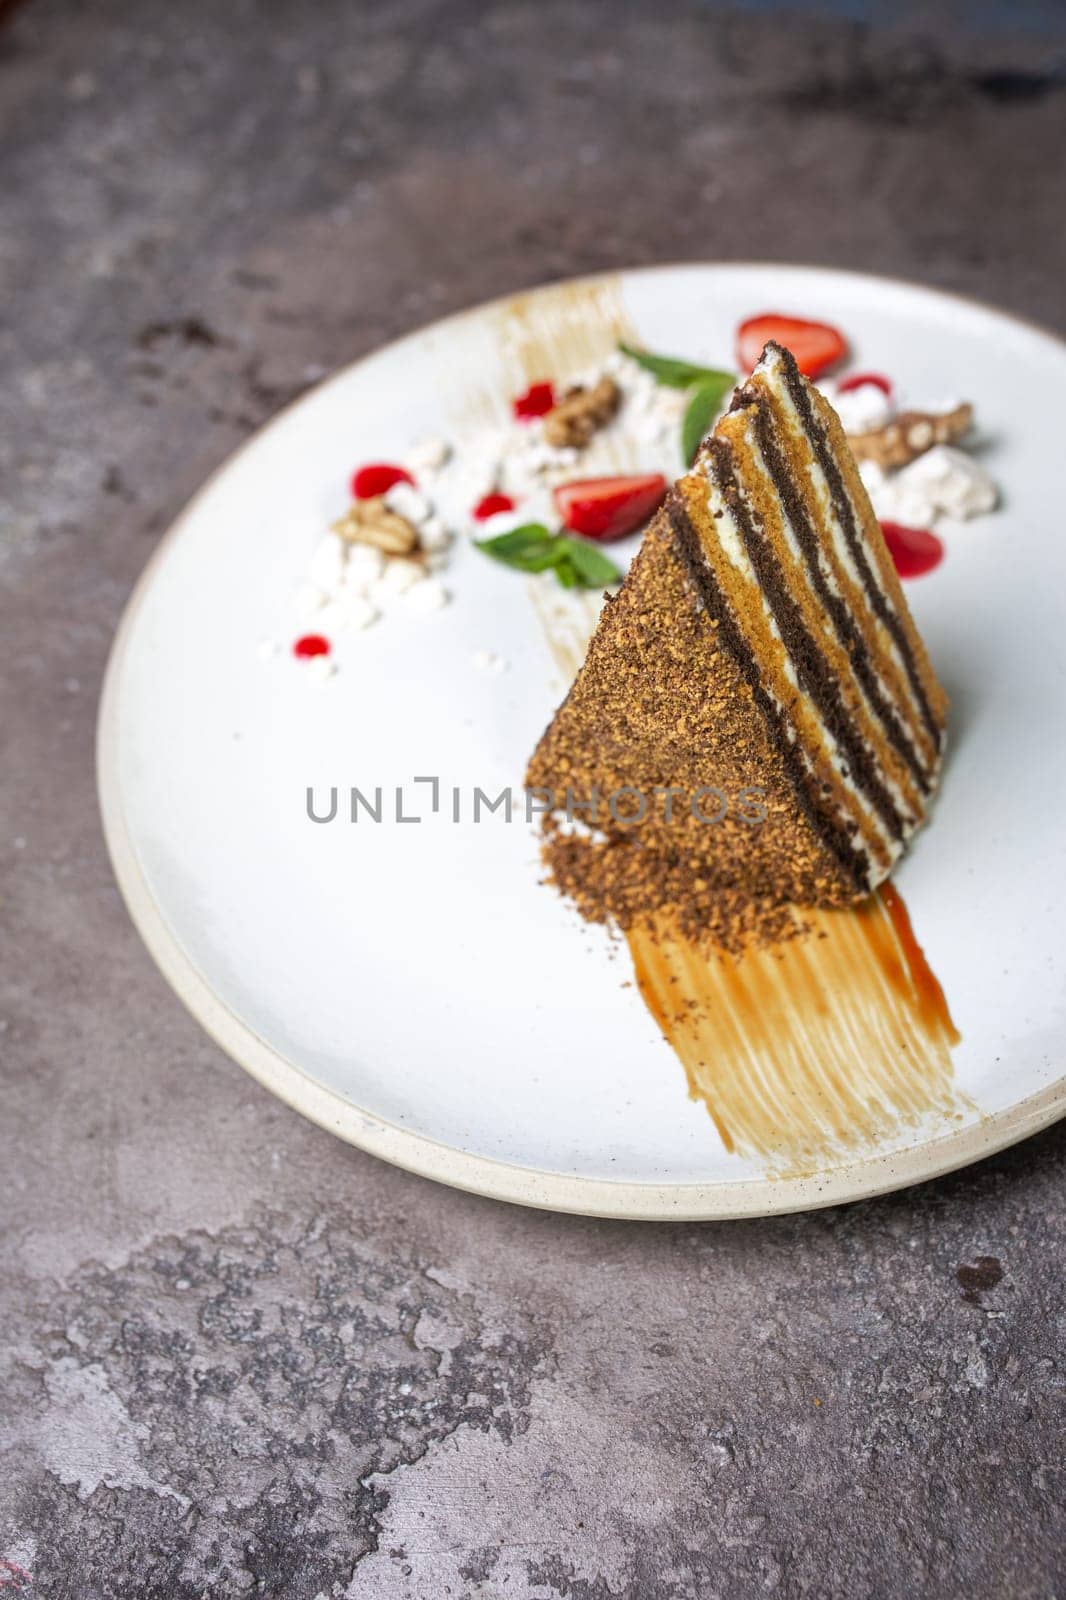 honey cake on a white plate photo for the menu by Pukhovskiy